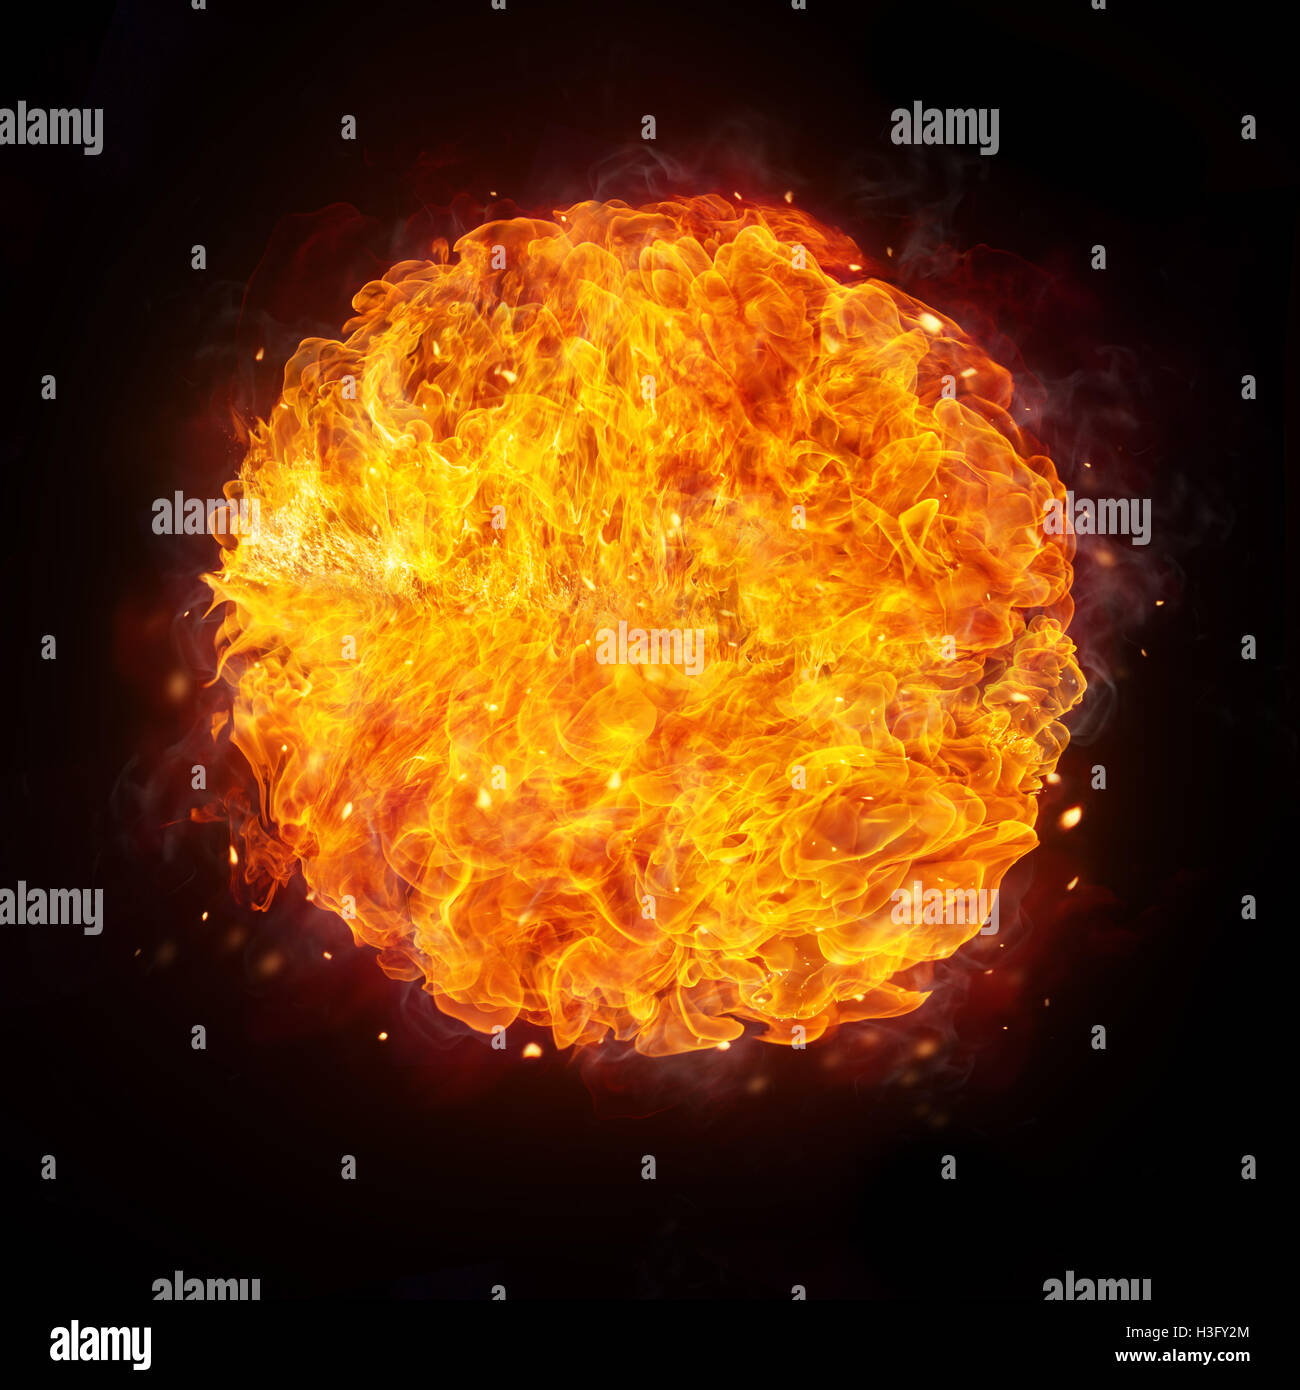 Abstract shape of fire ball isolated on black background Stock Photo